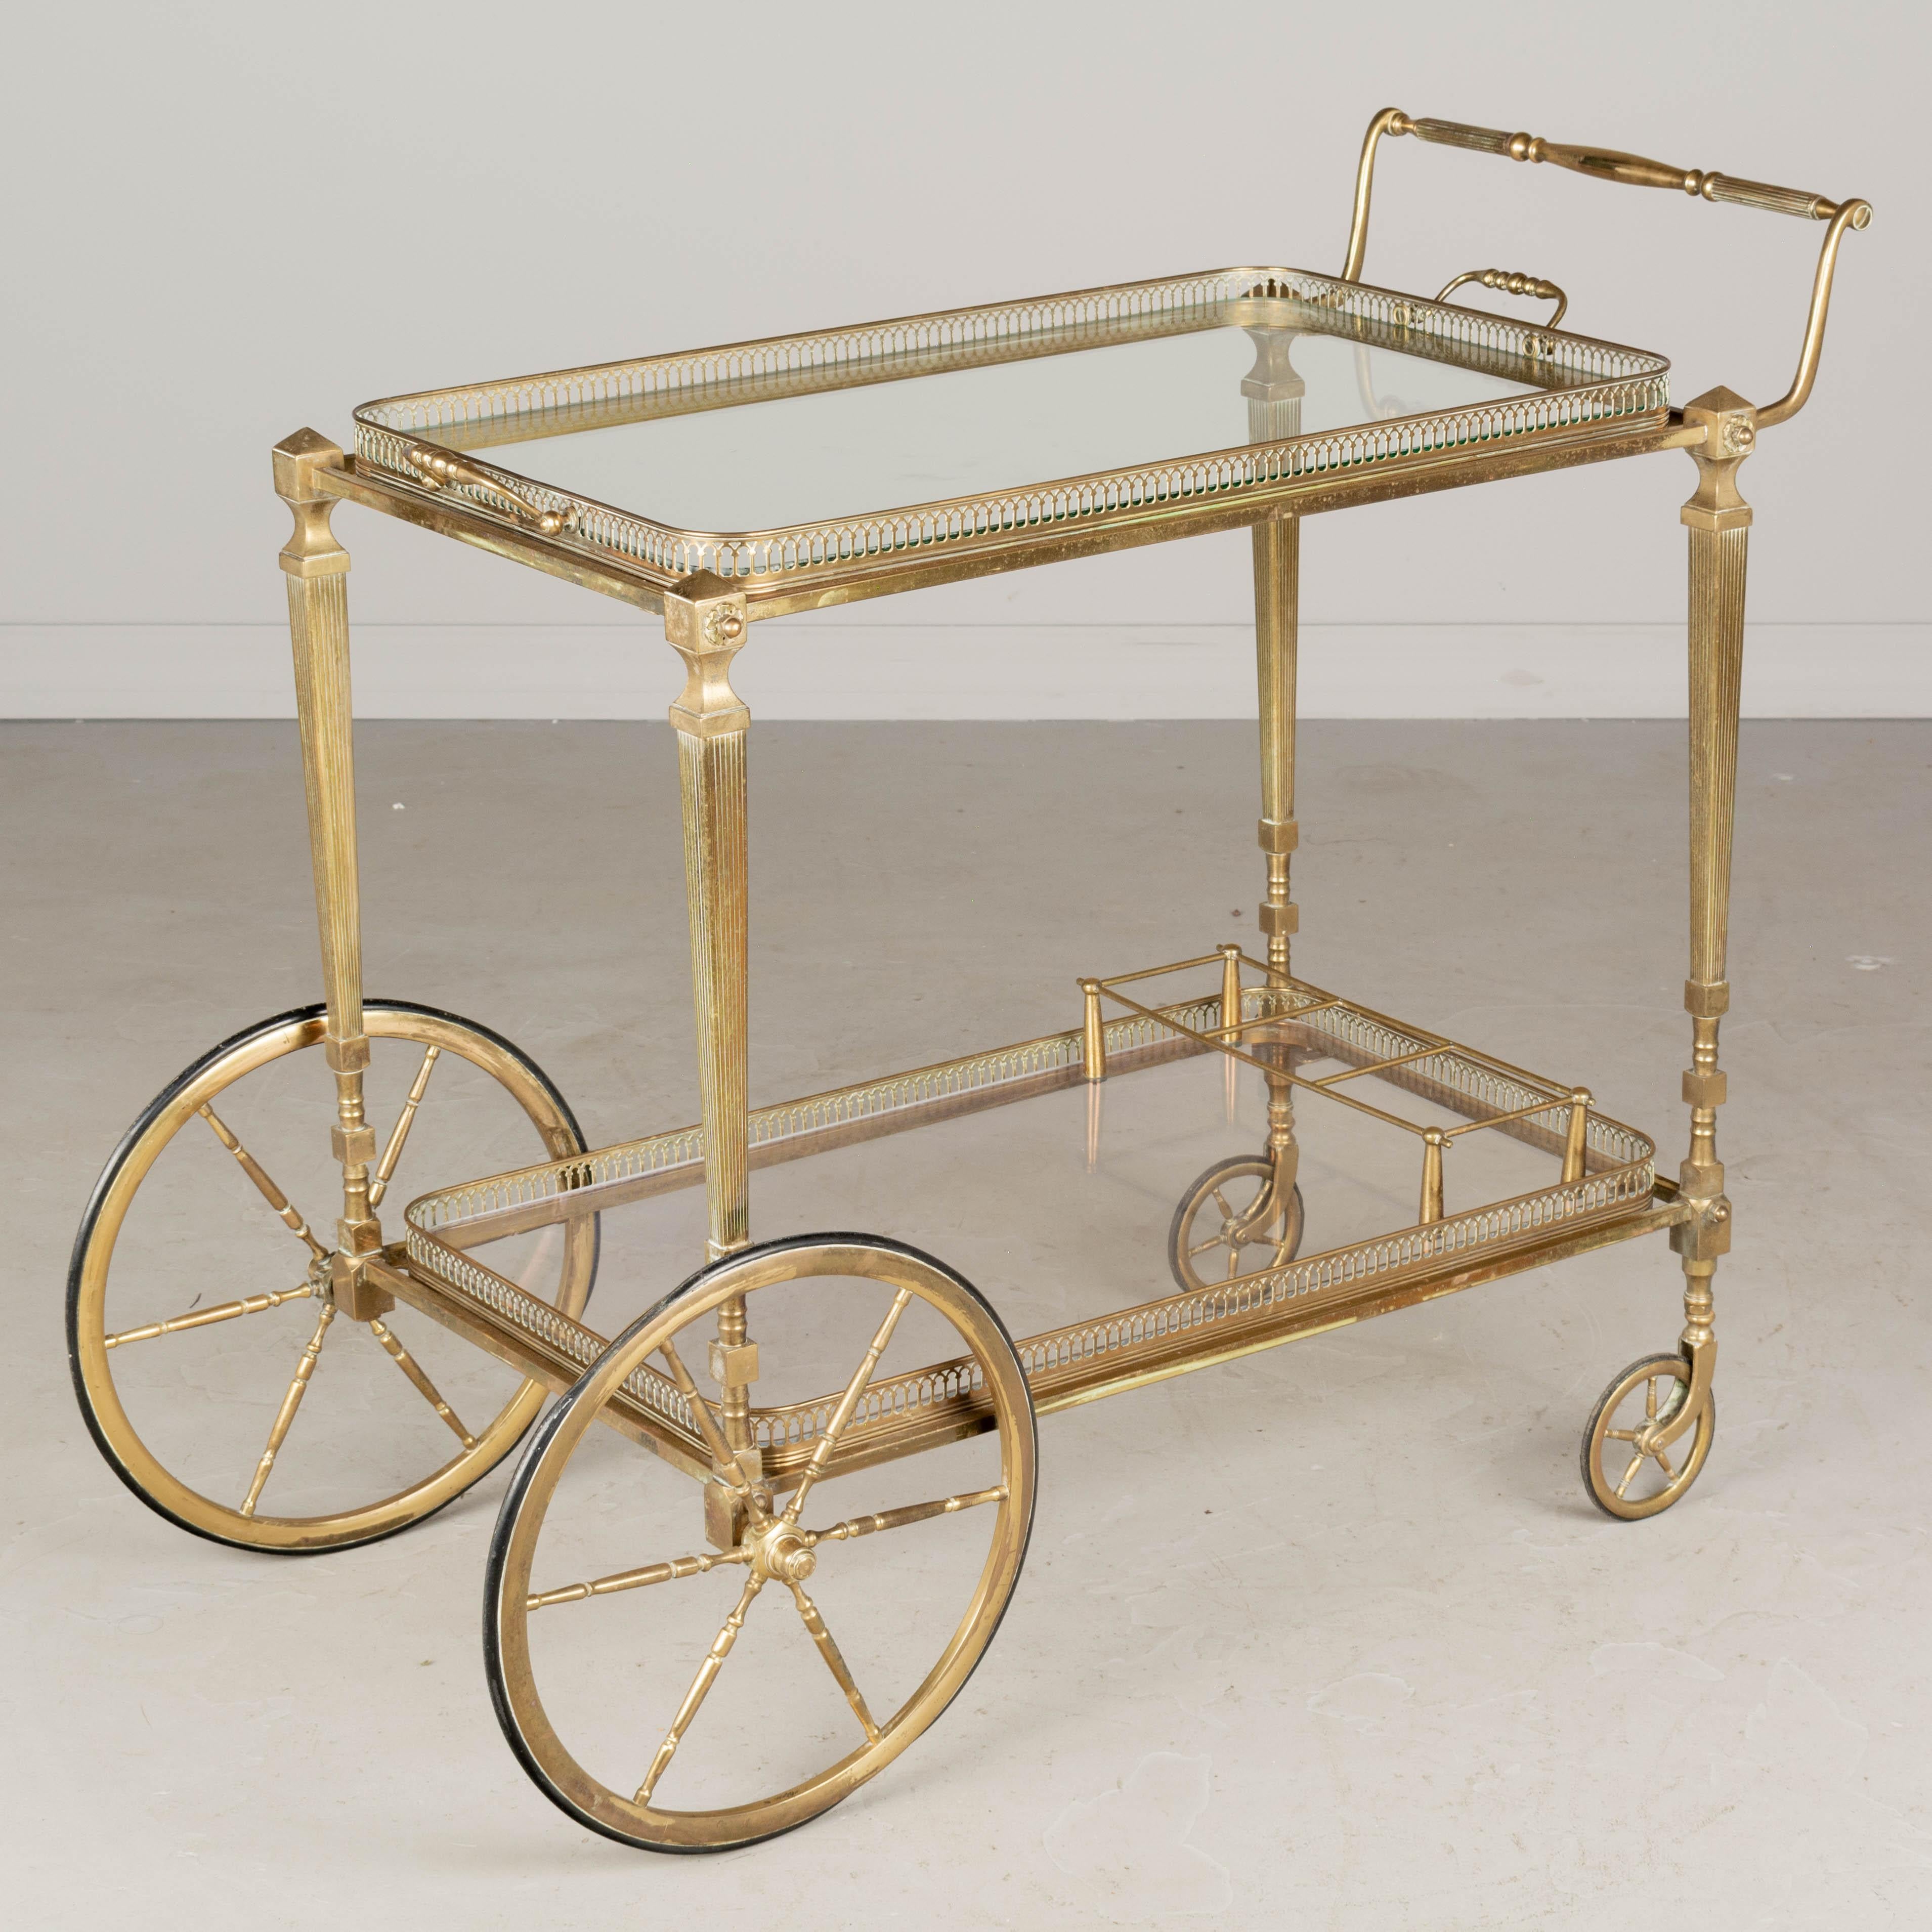 A Mid-Century Modern French brass bar cart in the style of Maison Jansen. The top shelf in glass and has handles and may be removed for use as a serving tray. The bottom shelf has a bottle rack and is plexiglass (as found). Nice patina. One of the